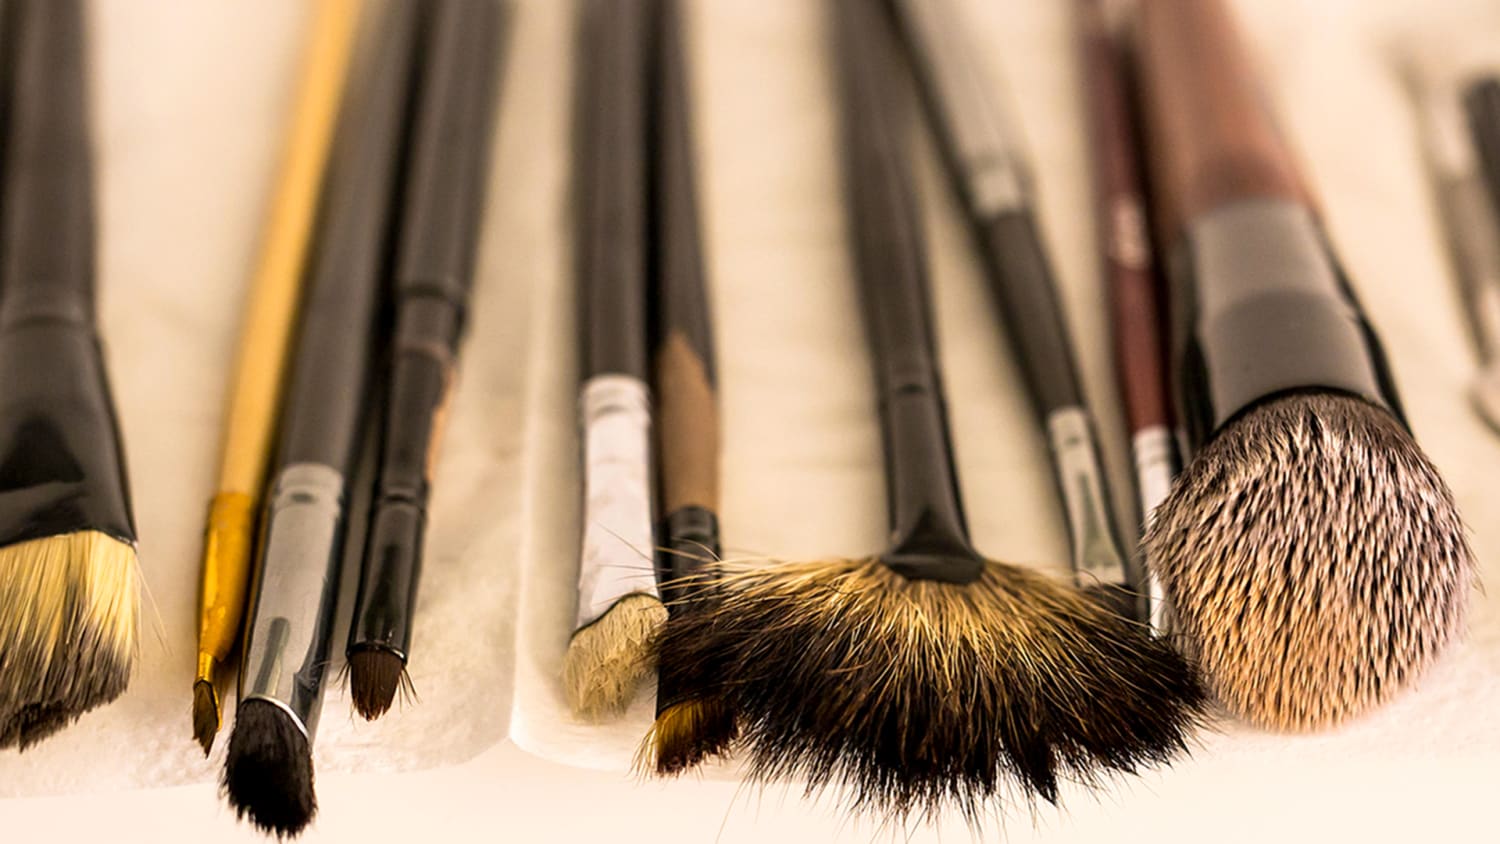 Do electric makeup brush cleaners ruin brushes?